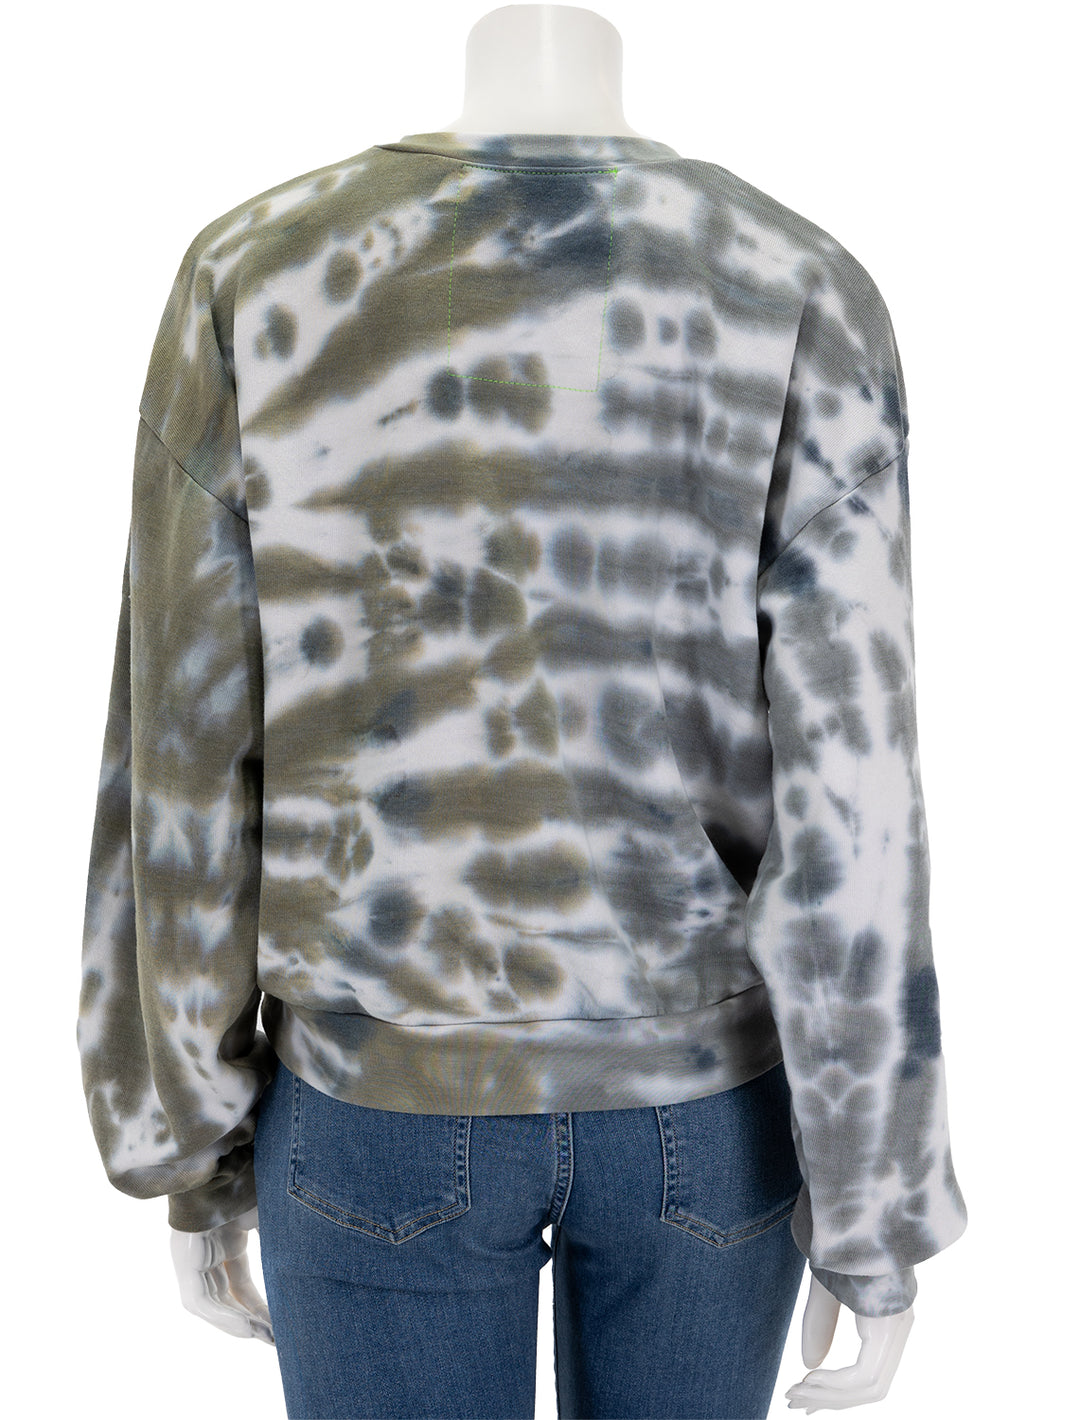 Back view of Aviator Nation's hand dyed crew sweatshirt in grey/olive tie dye.